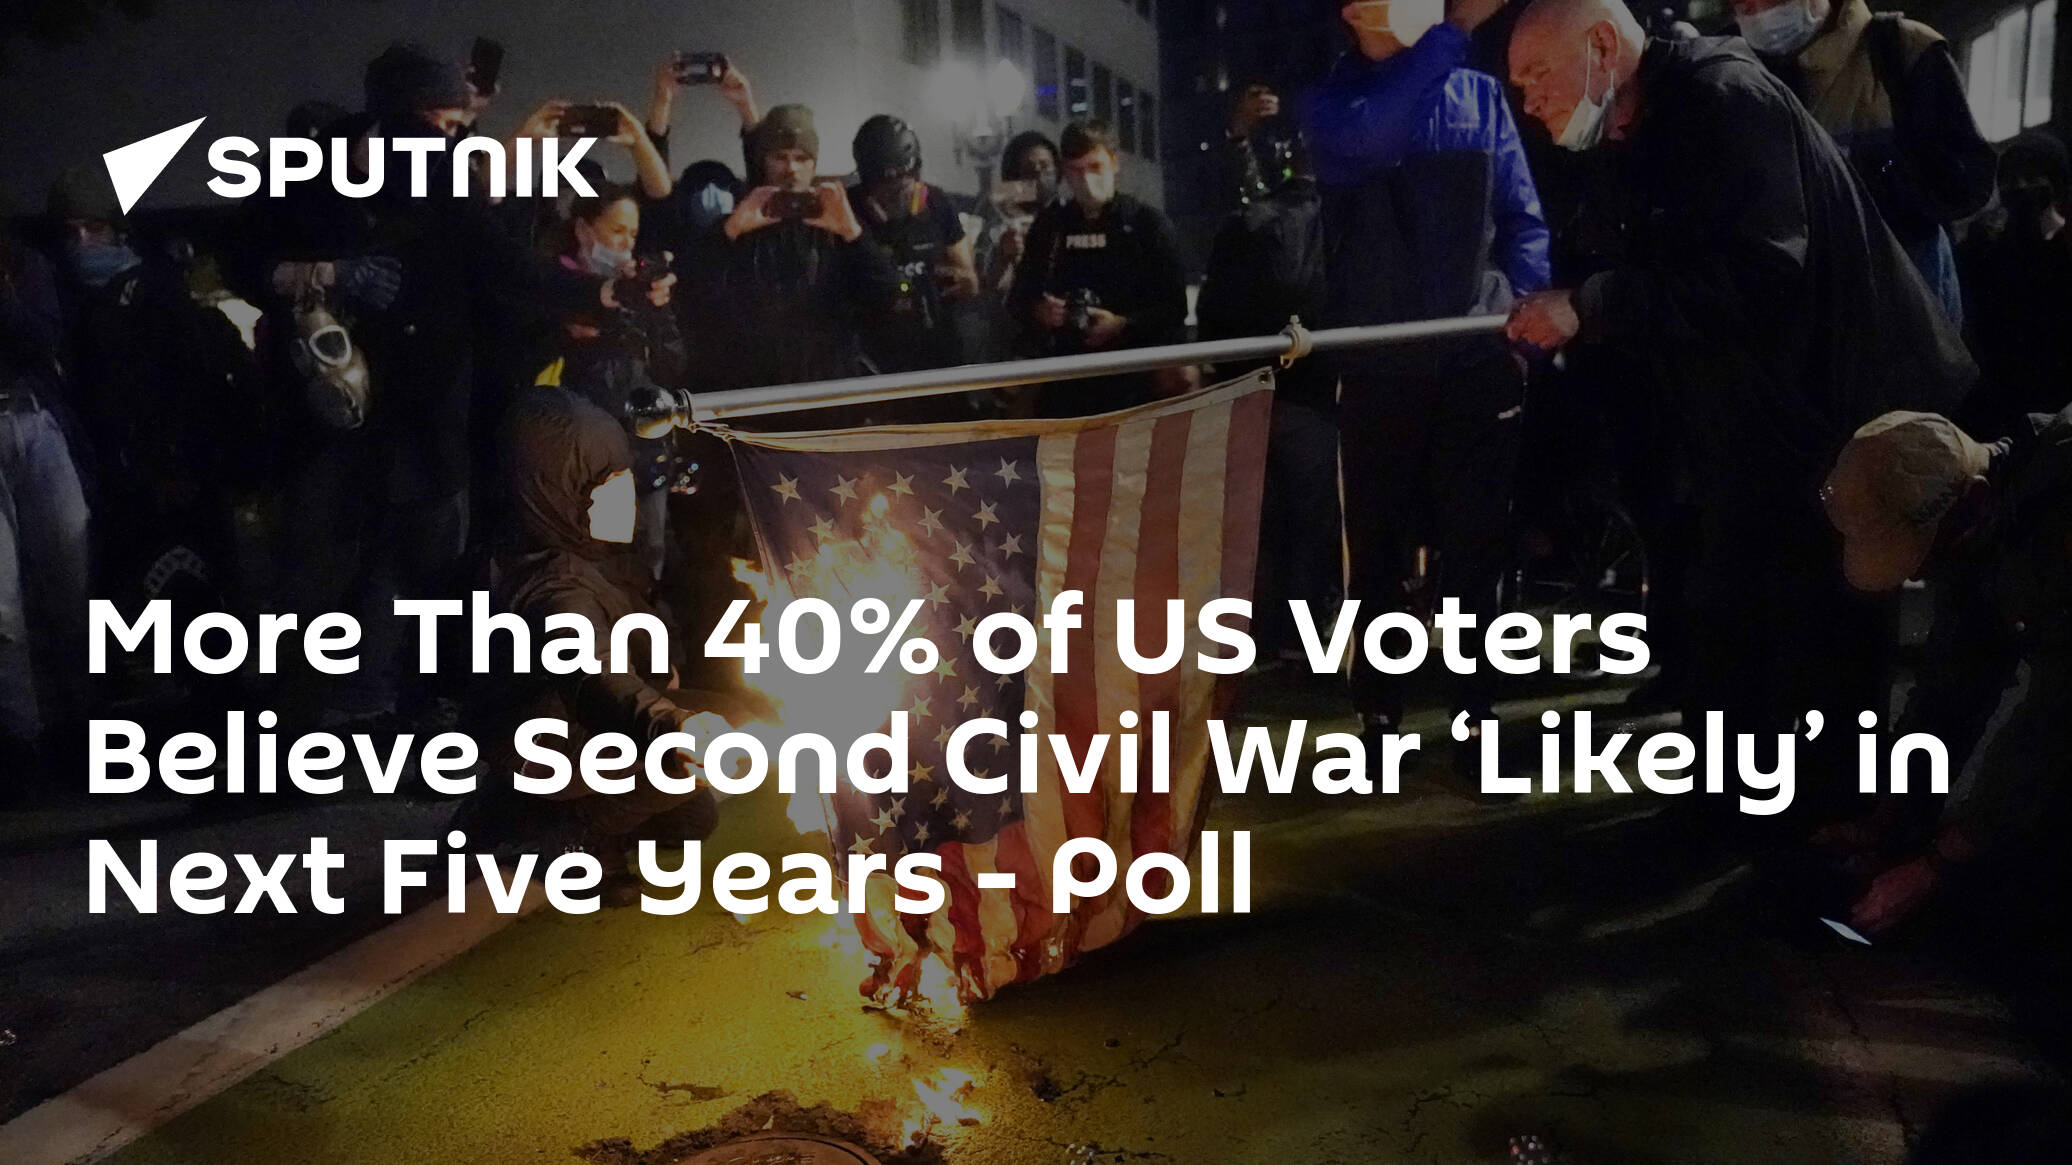 More Than 40% of US Voters Believe Second Civil War ‘Likely’ in Next Five Years – Poll